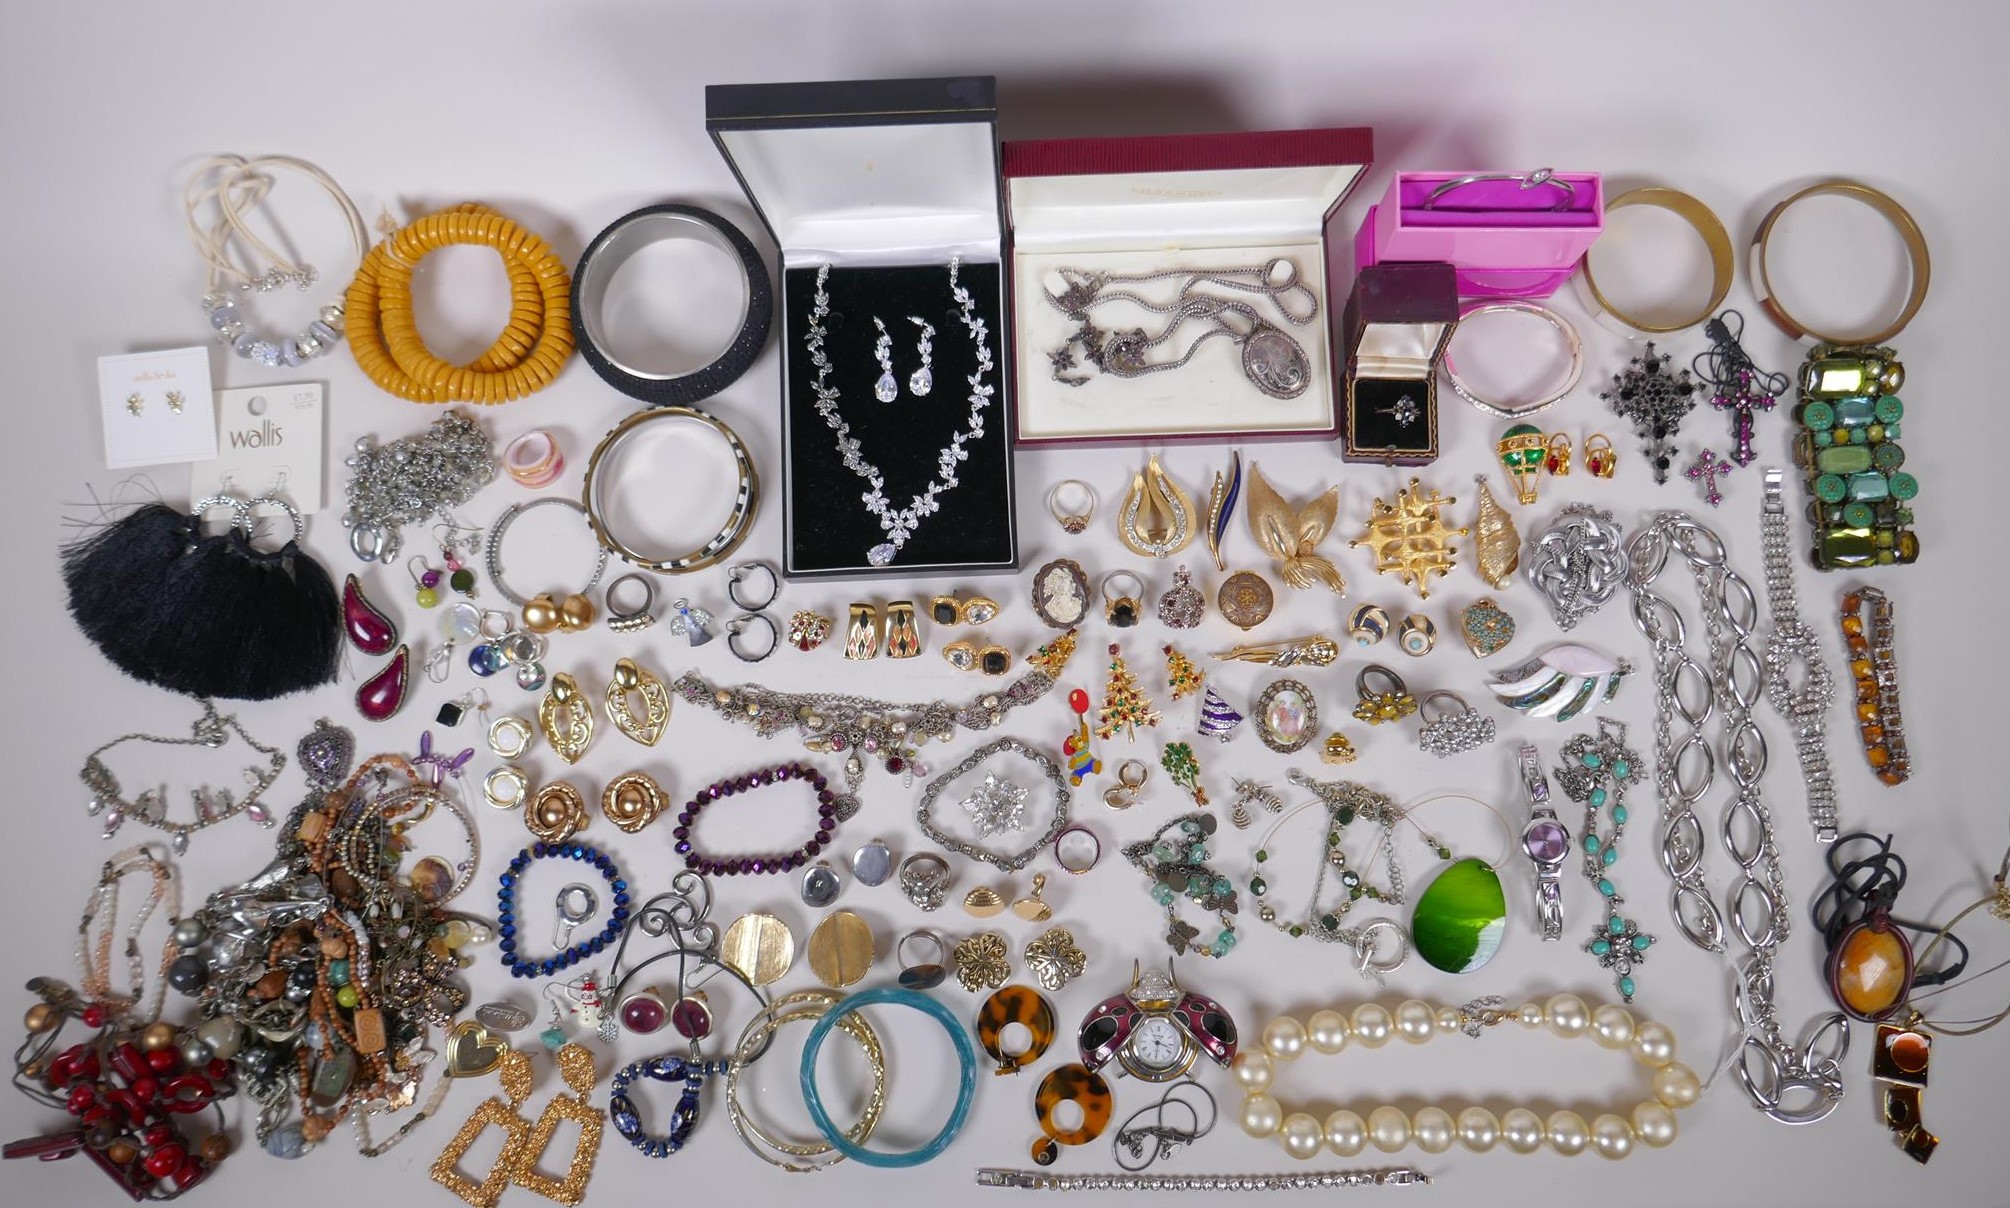 An assortment of vintage costume jewellery including bangles, necklaces, earrings, rings etc